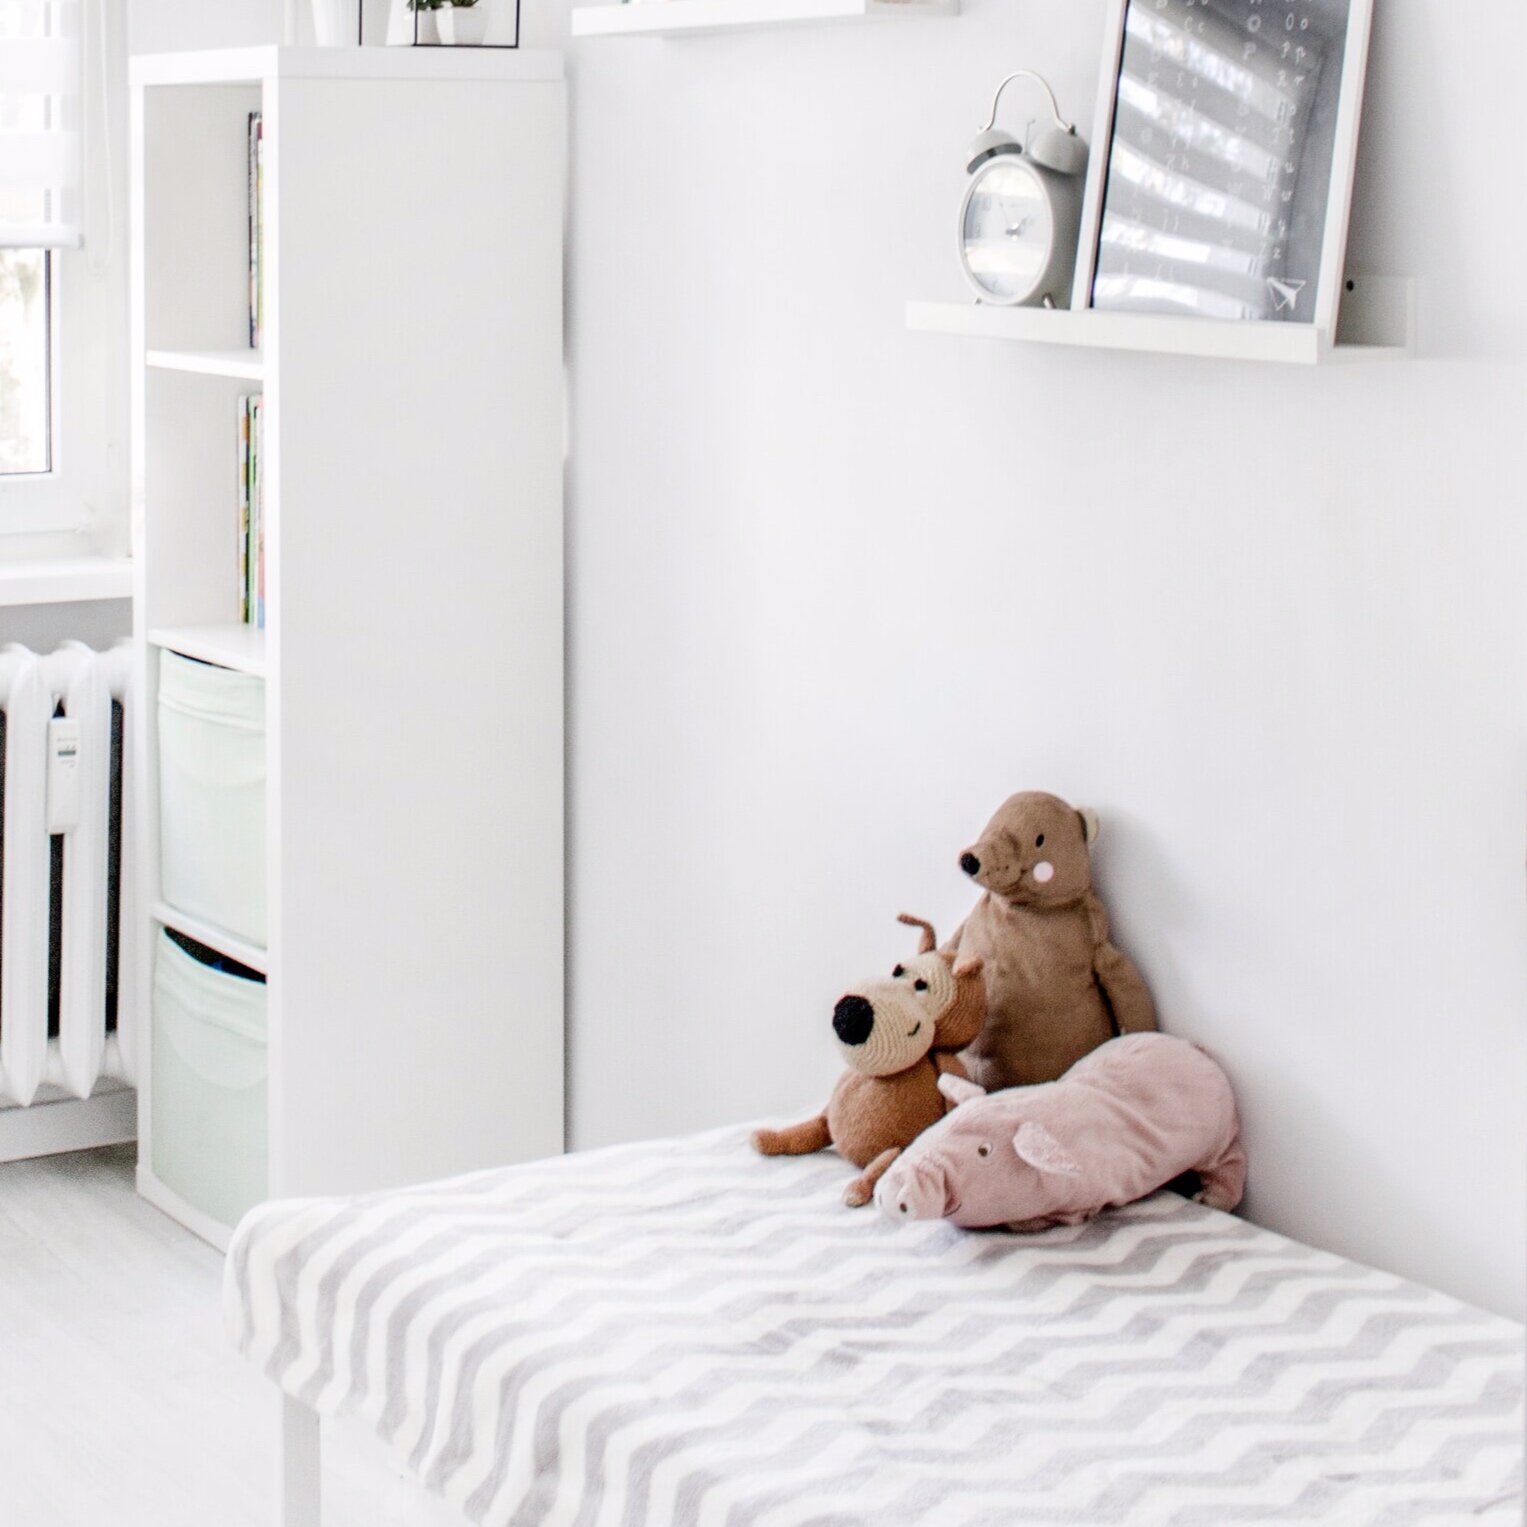 plush-toys-on-top-of-white-and-grey-mattress-inside-bedroom-1139784.jpg